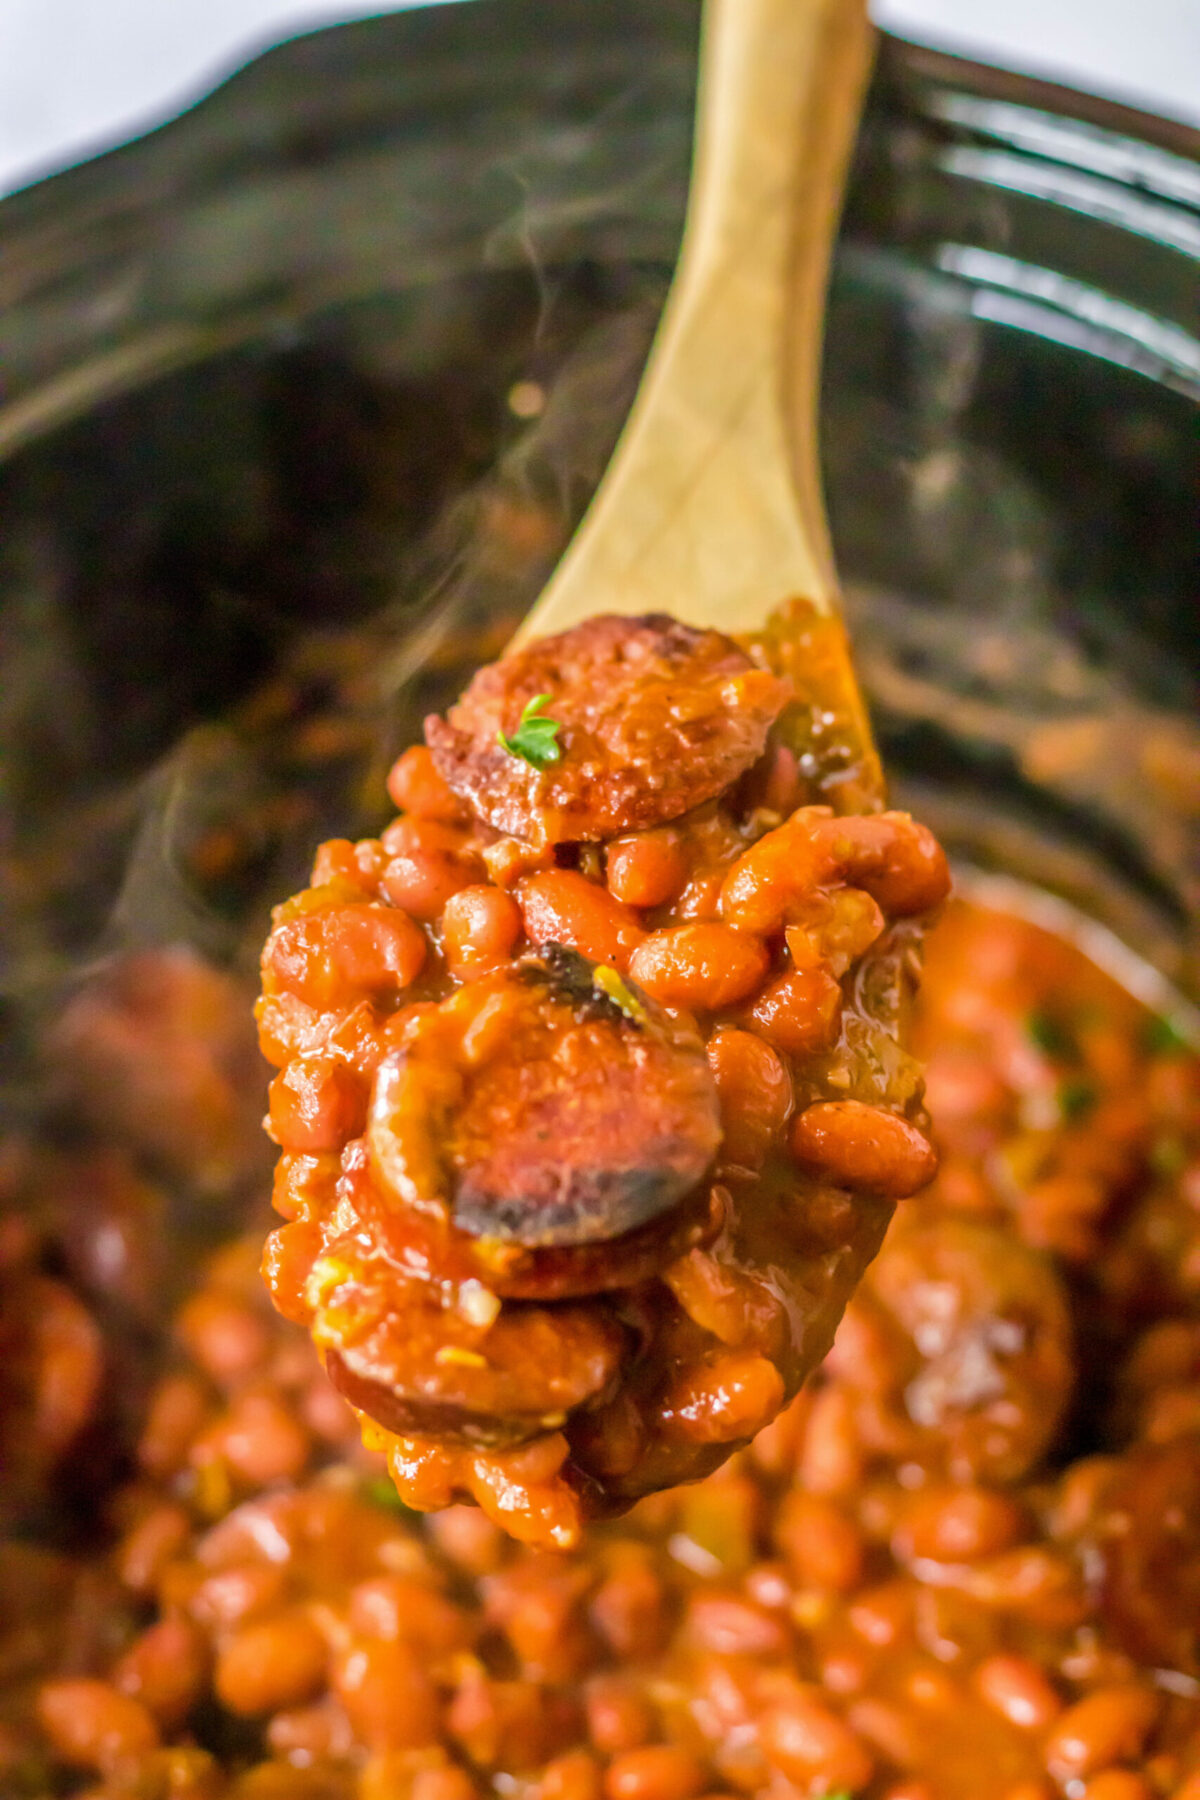 Red beans and sausage cooking in a crockpot, with a wooden spoon removing a spoonful.